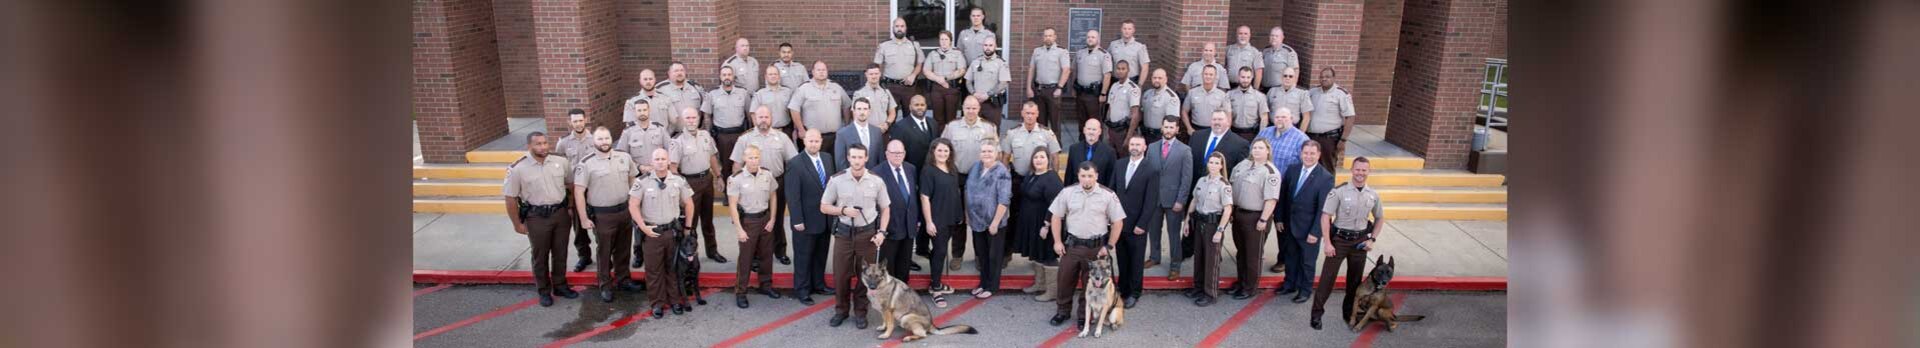 Jones County Sheriff's office Group photo with k9s